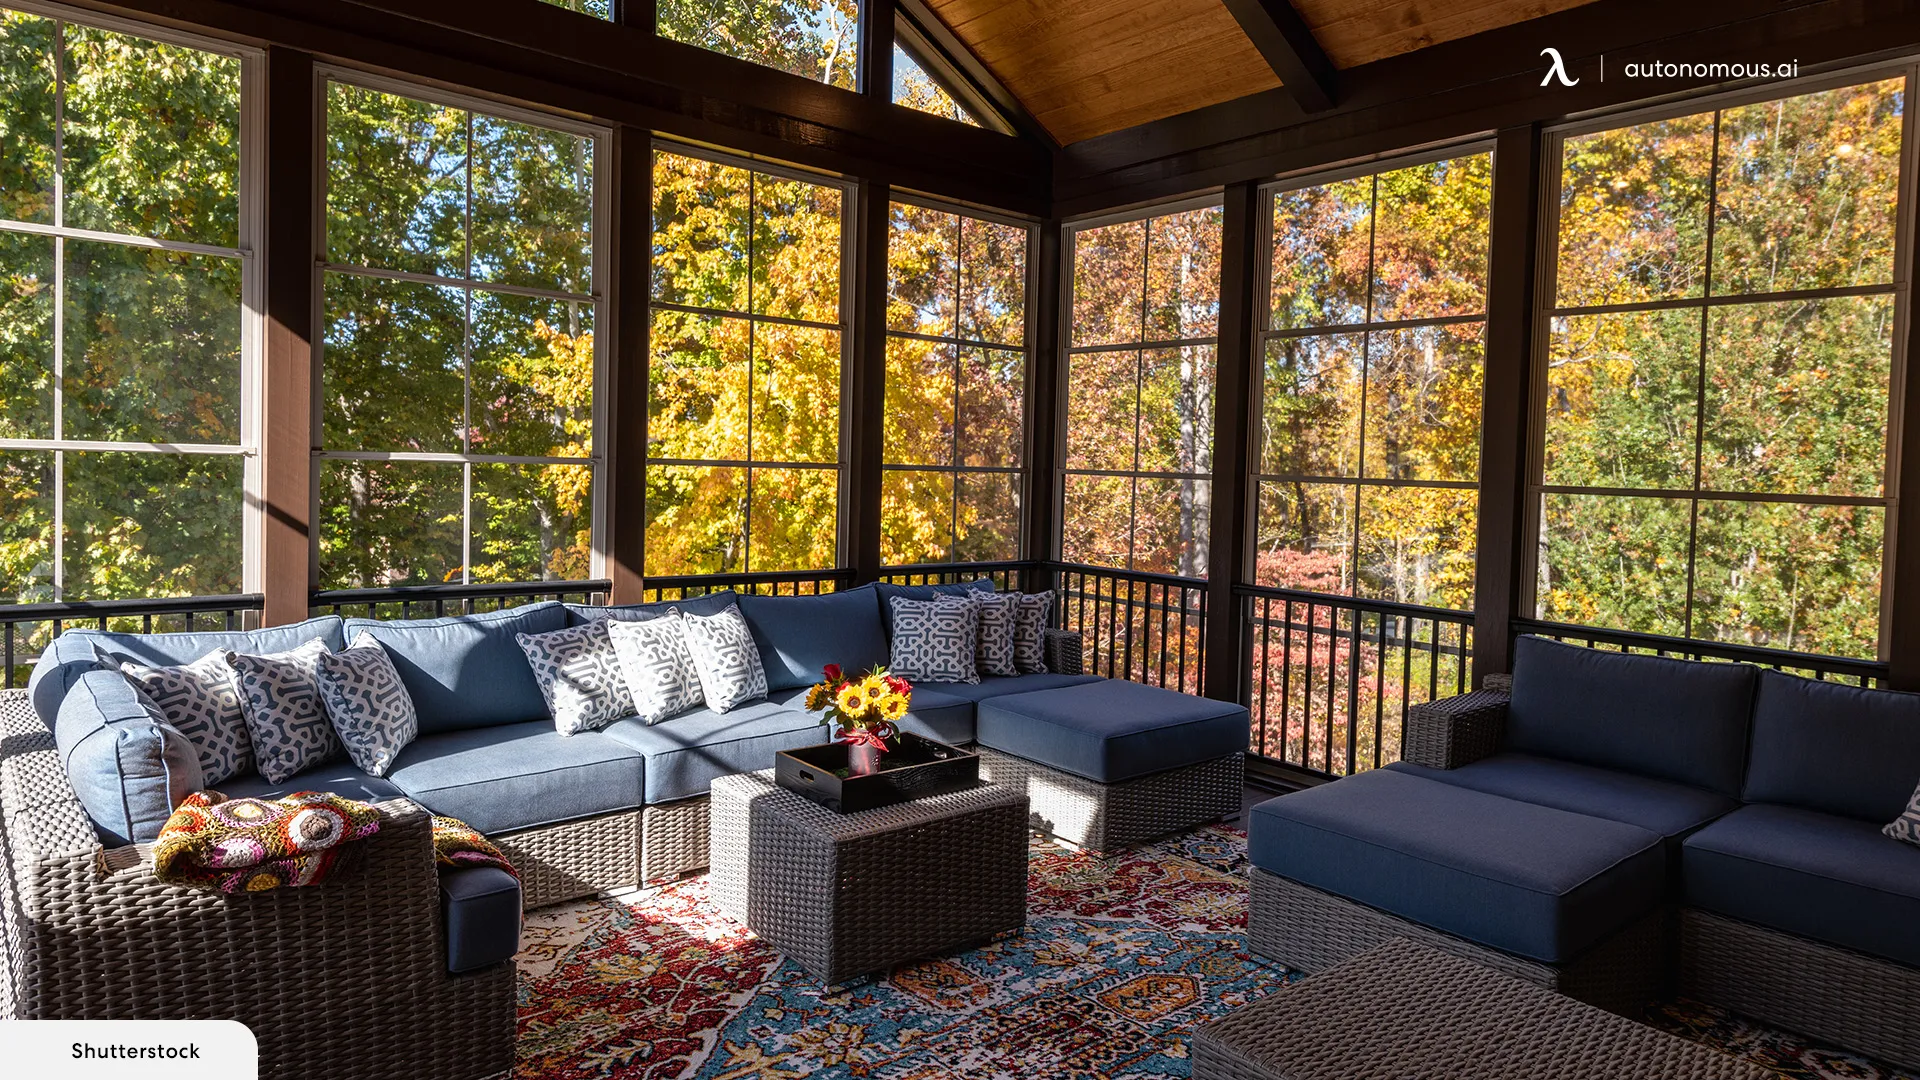 Add a Sunroom or Screened-in Porch to Your Home